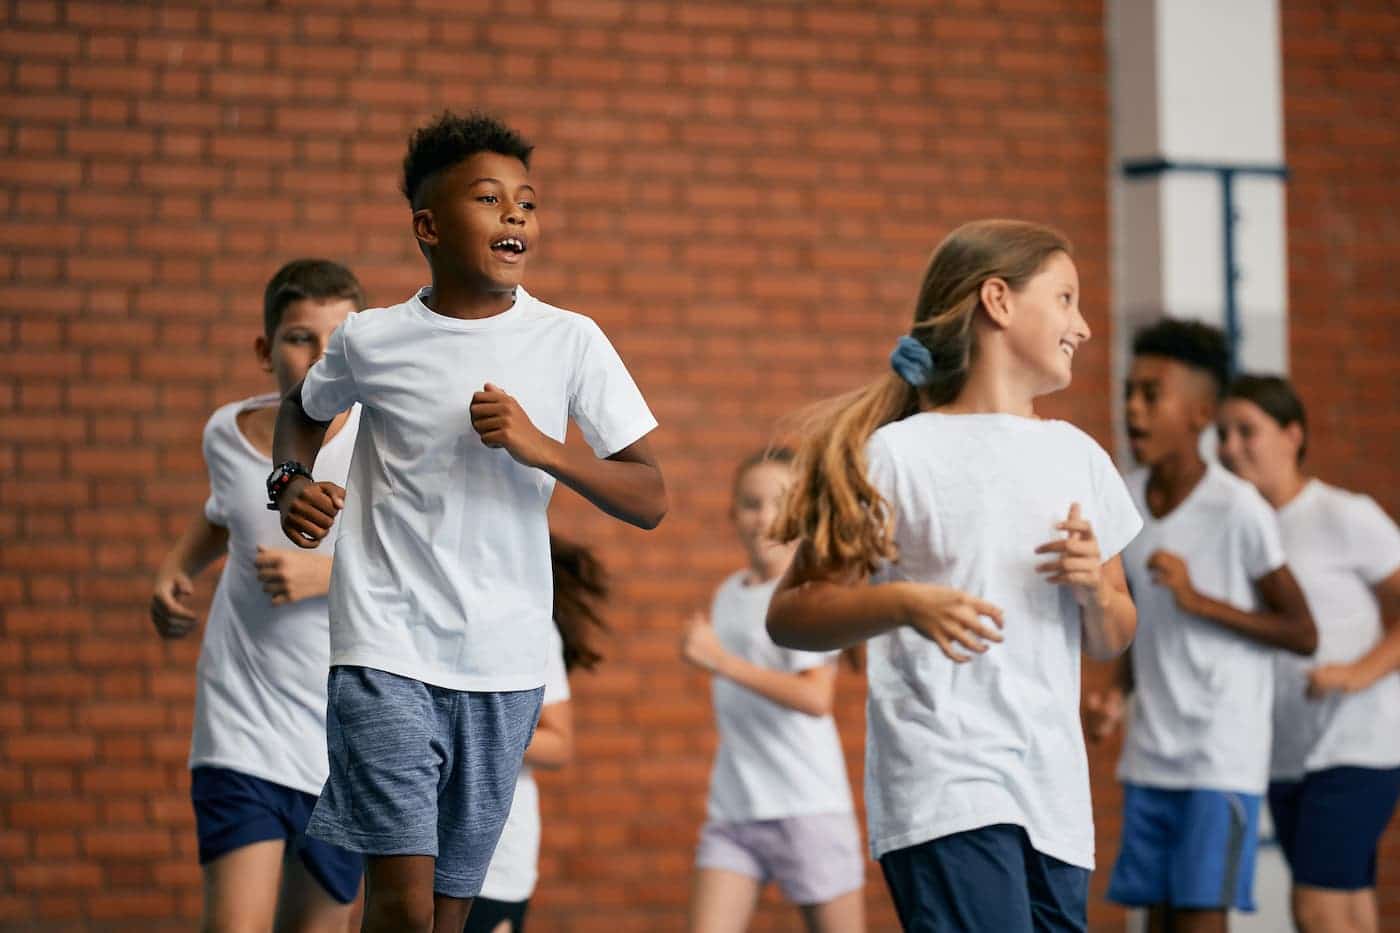 Group of school children run during physical education class at school gym